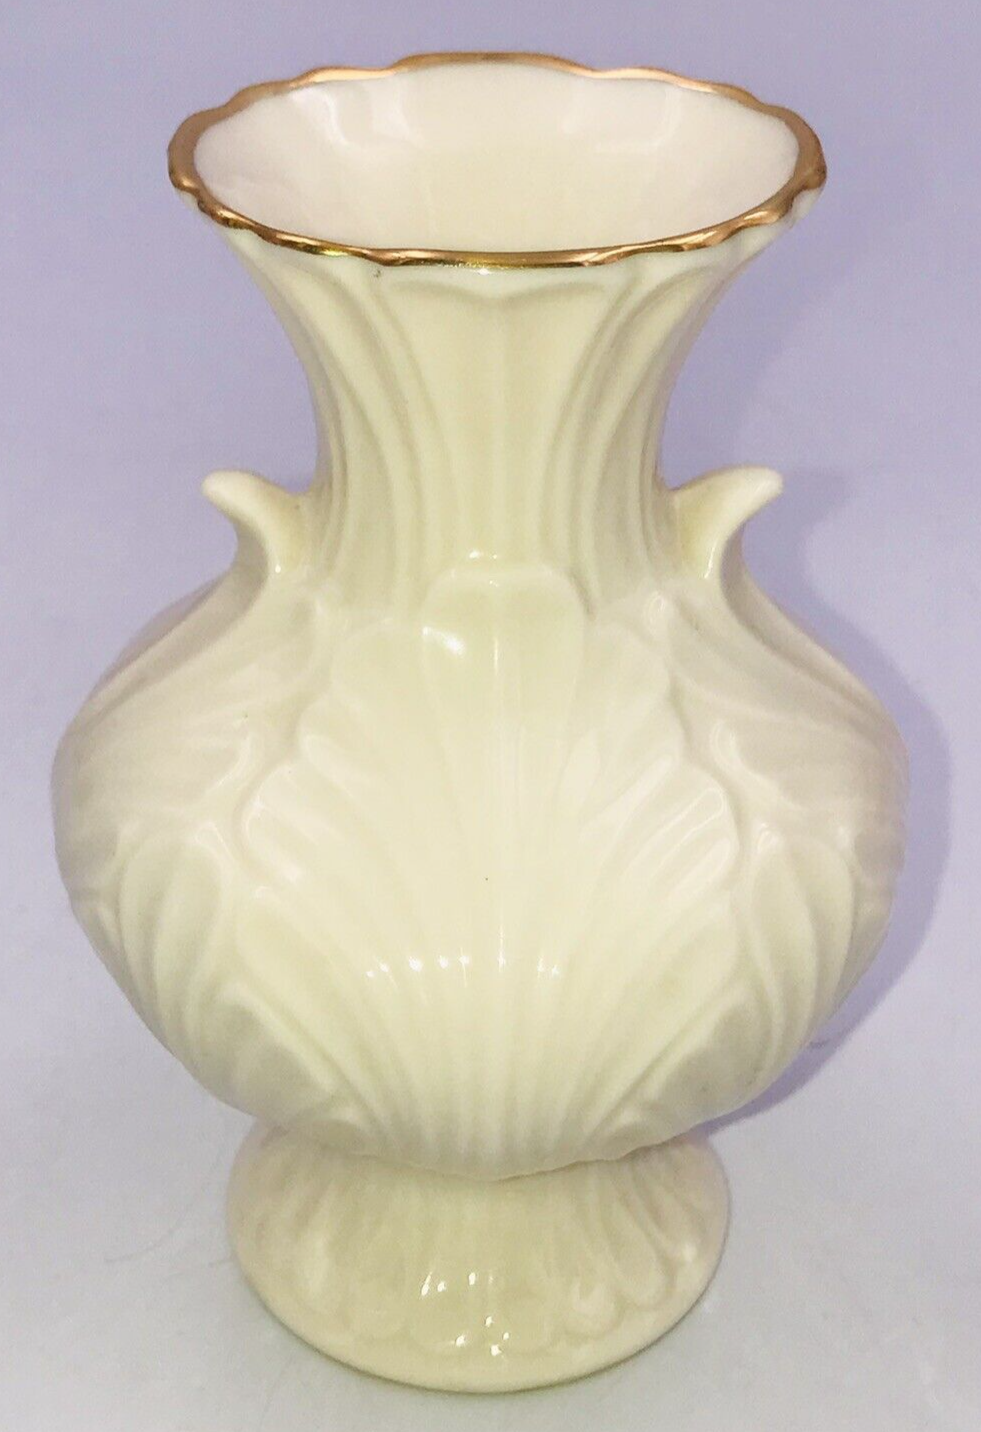 Primary image for Vintage Lenox Elfin Collection Bud Vase USA 4.5" Tall 3" Diameter w/ Gold Rim